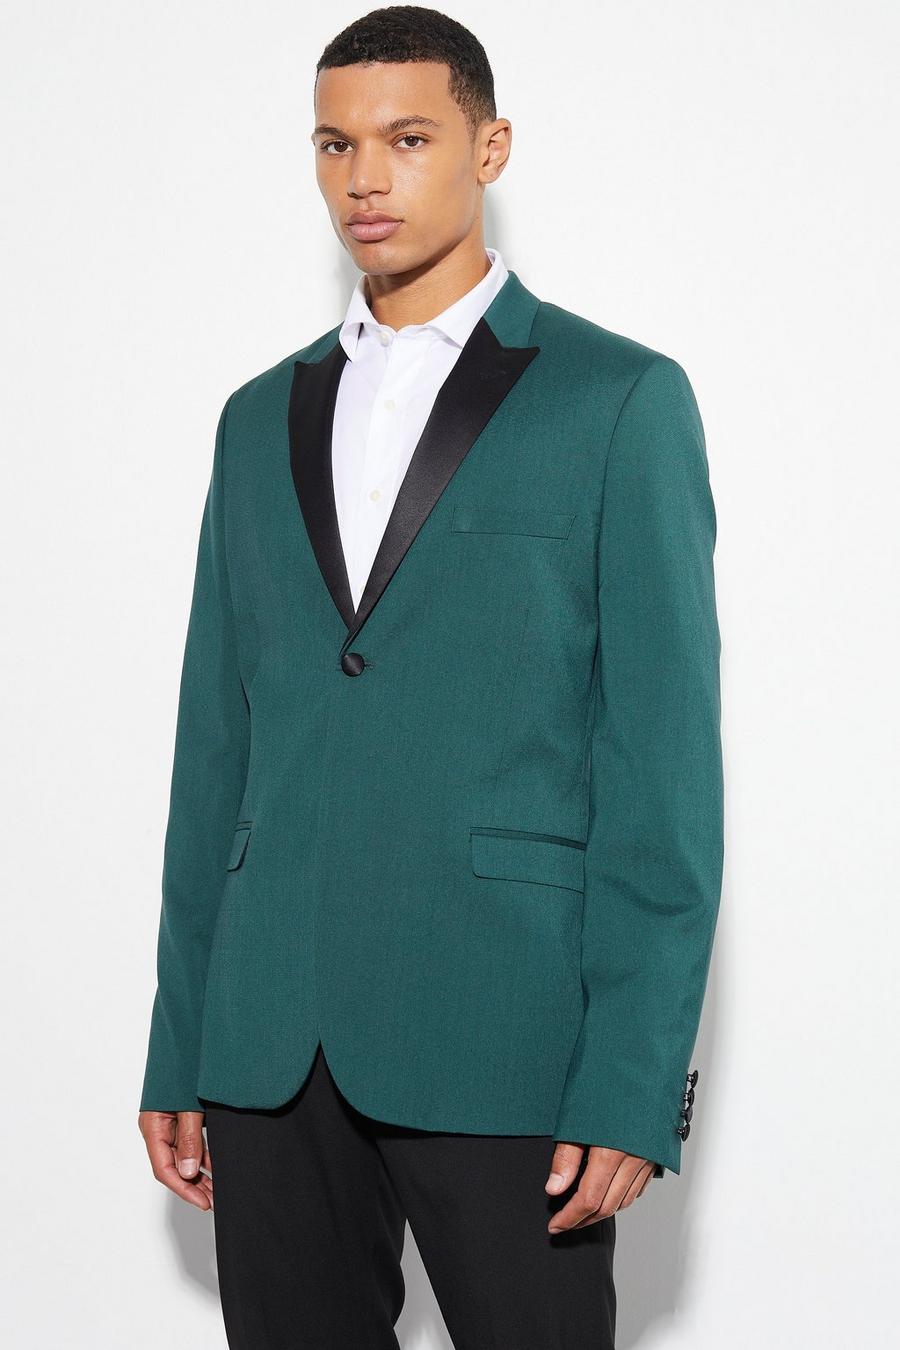 Forest Tall Skinny Tuxedo Single Breasted Suit Jacket image number 1